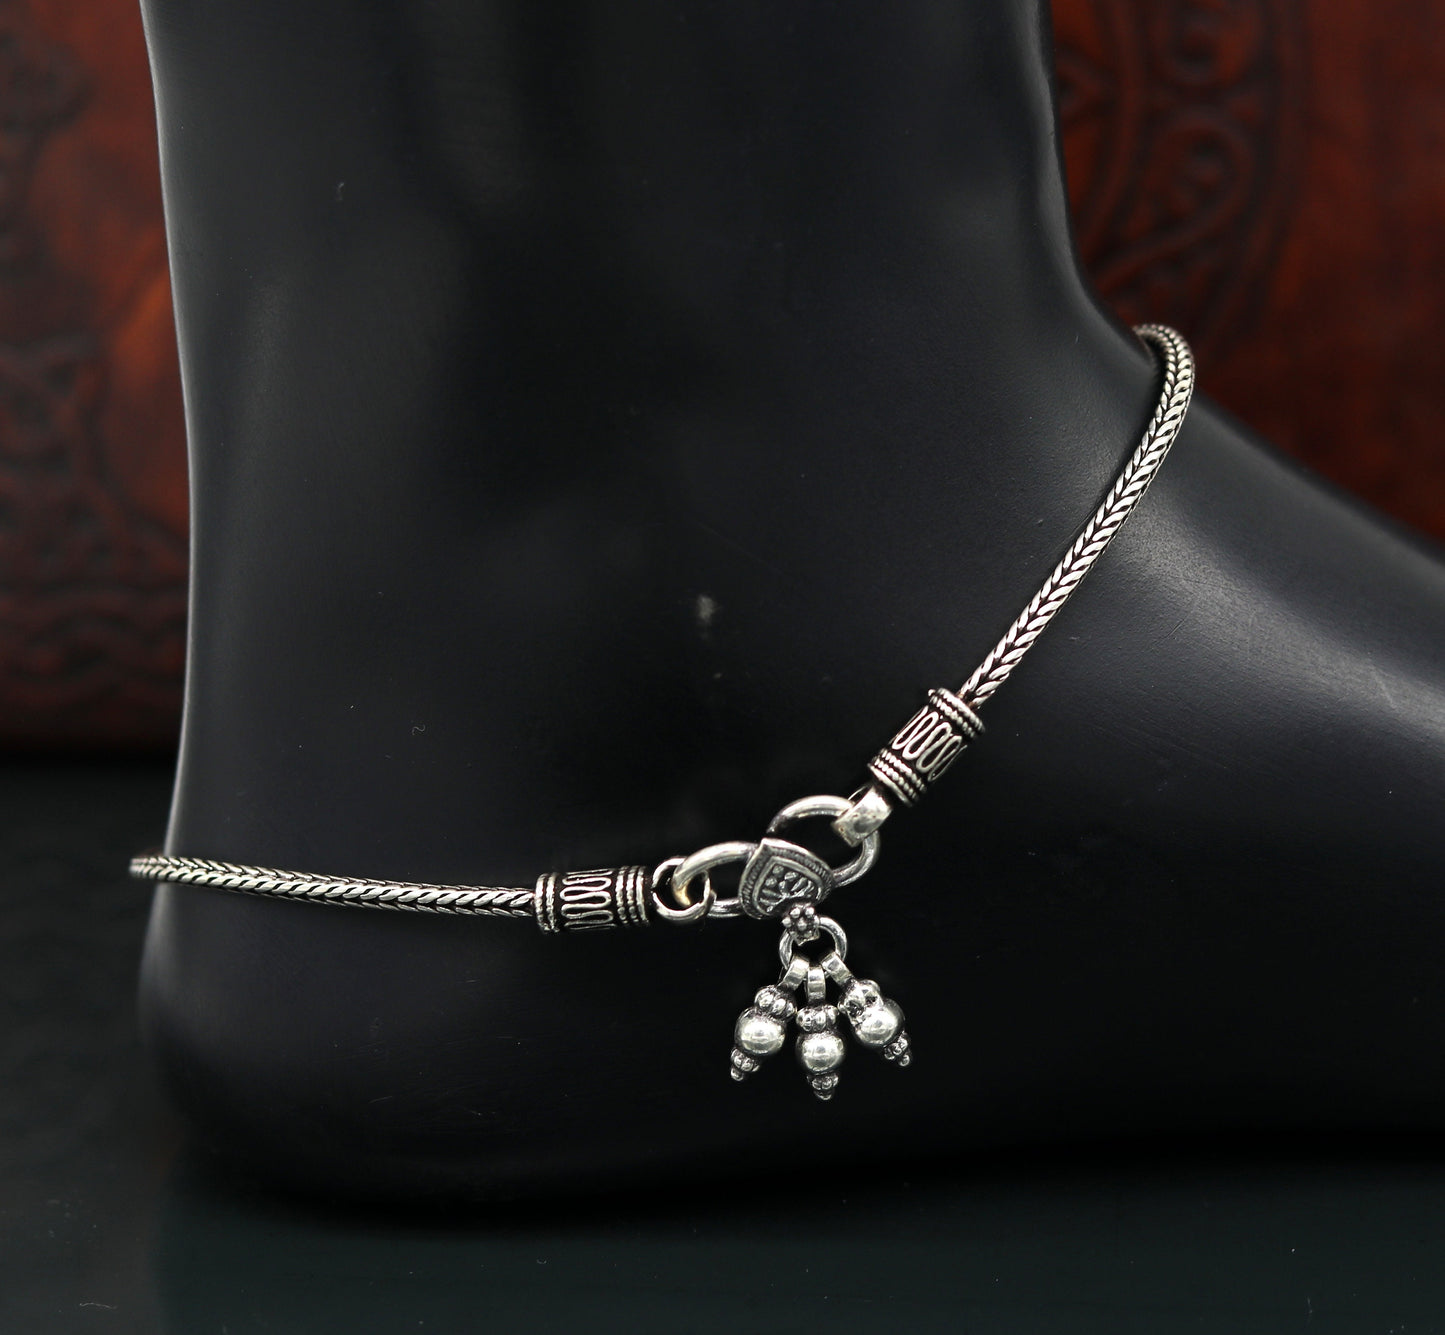 925 Sterling silver handmade wheat chain ankle bracelet, vintage oxidized charm anklets, tribal belly dance customized jewelry nank456 - TRIBAL ORNAMENTS